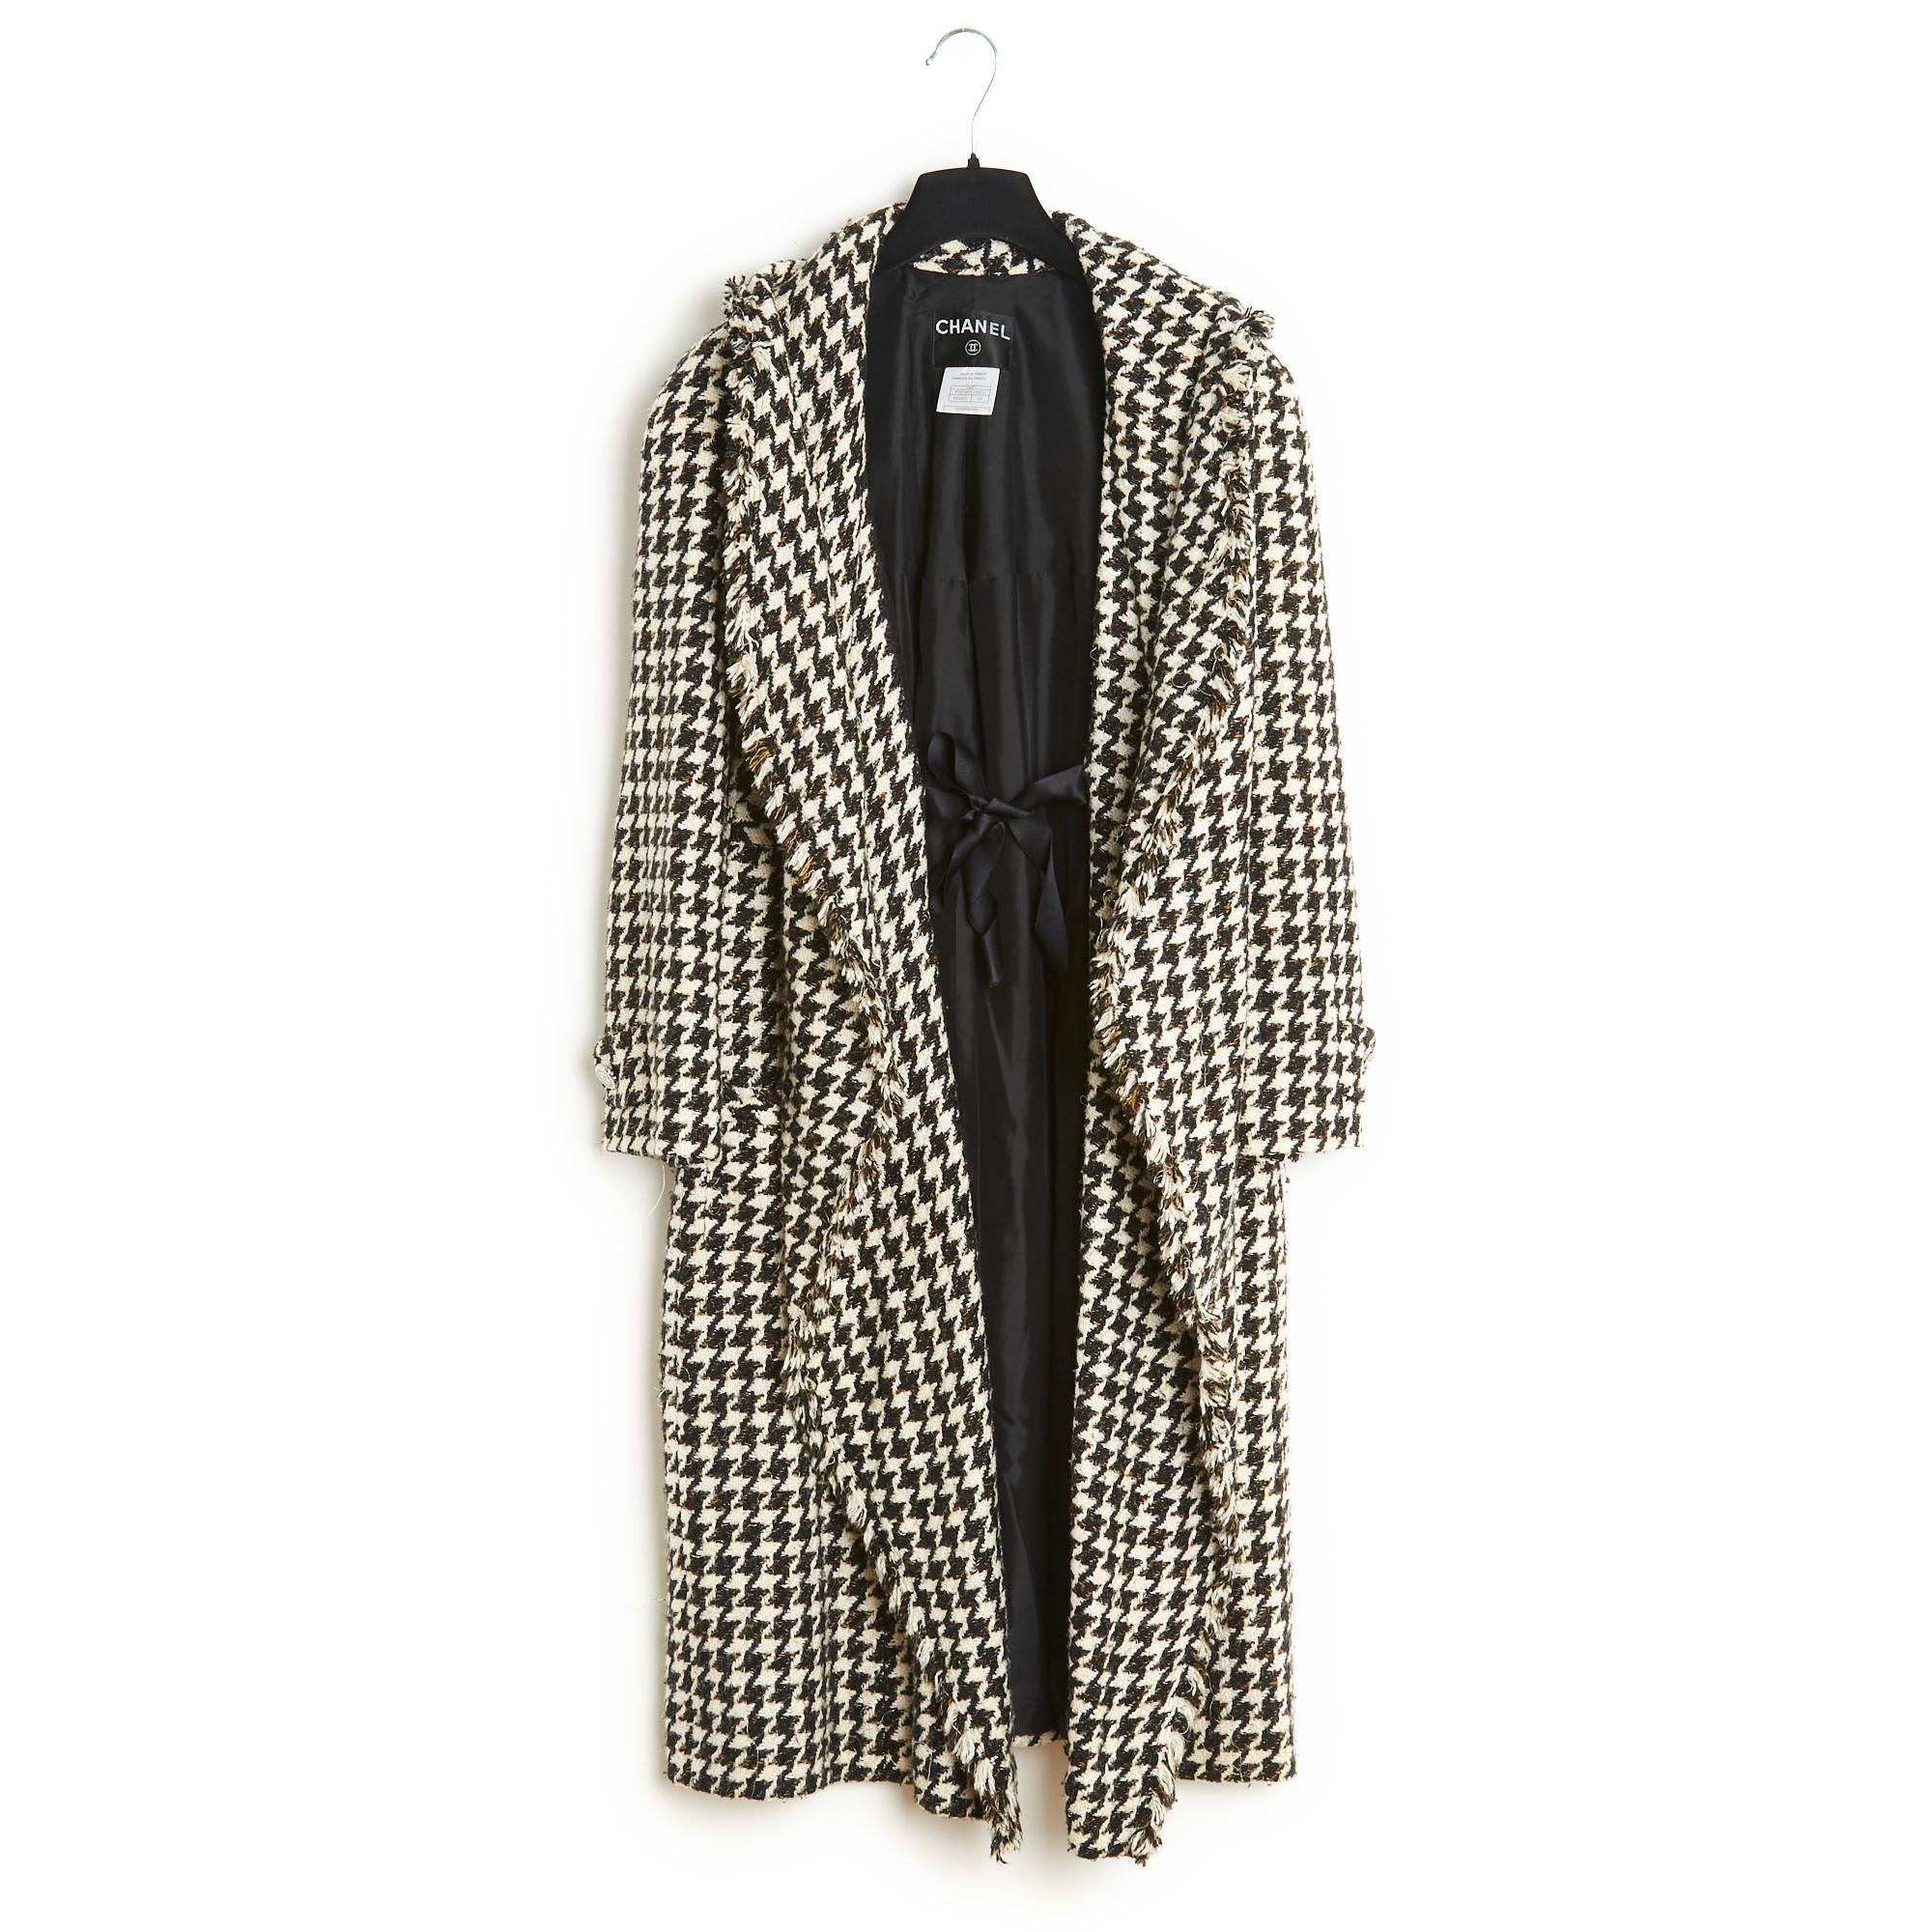 Chanel mid-length coat from SS2006 collection in silk tweed with houndstooth pattern enhanced with silver thread, straight, slightly flared shape, shawl collar closed with 2 ties to tie in front in black grosgrain, 4 patch pockets at the chest and